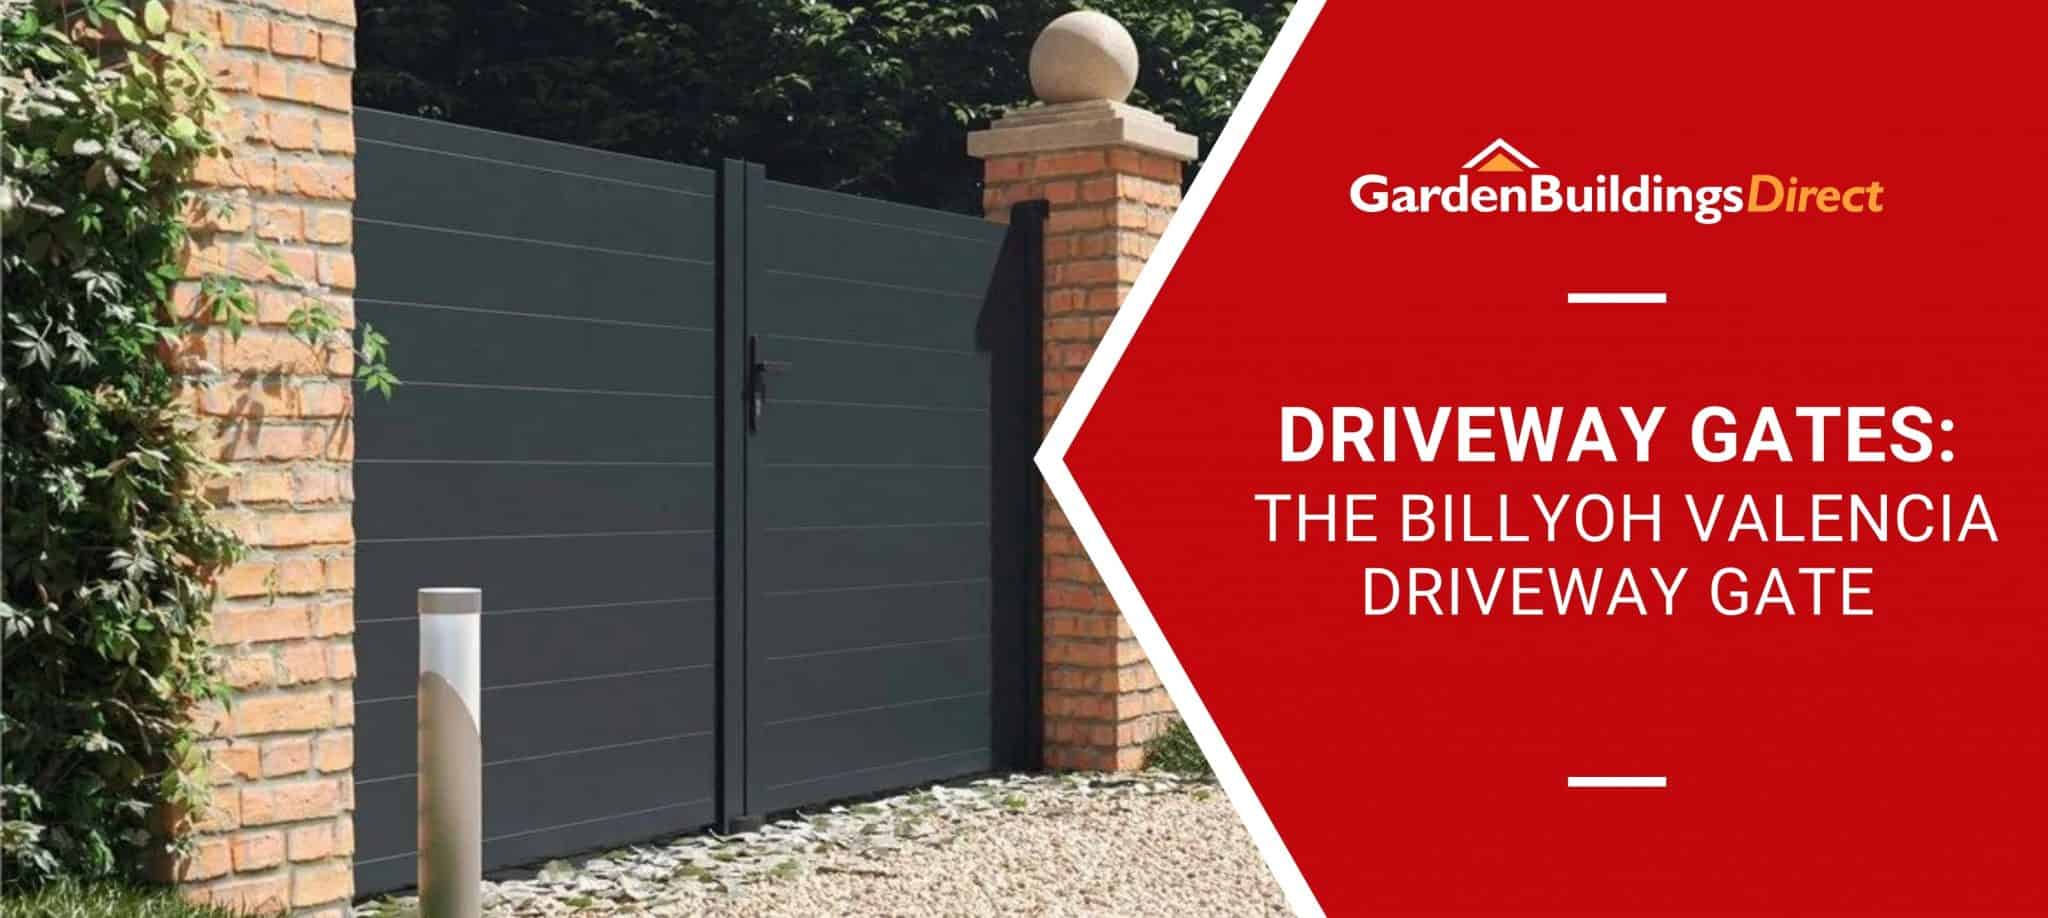 BillyOh Valencia Double swing driveway gate with Garden Buildings Direct banner and logo